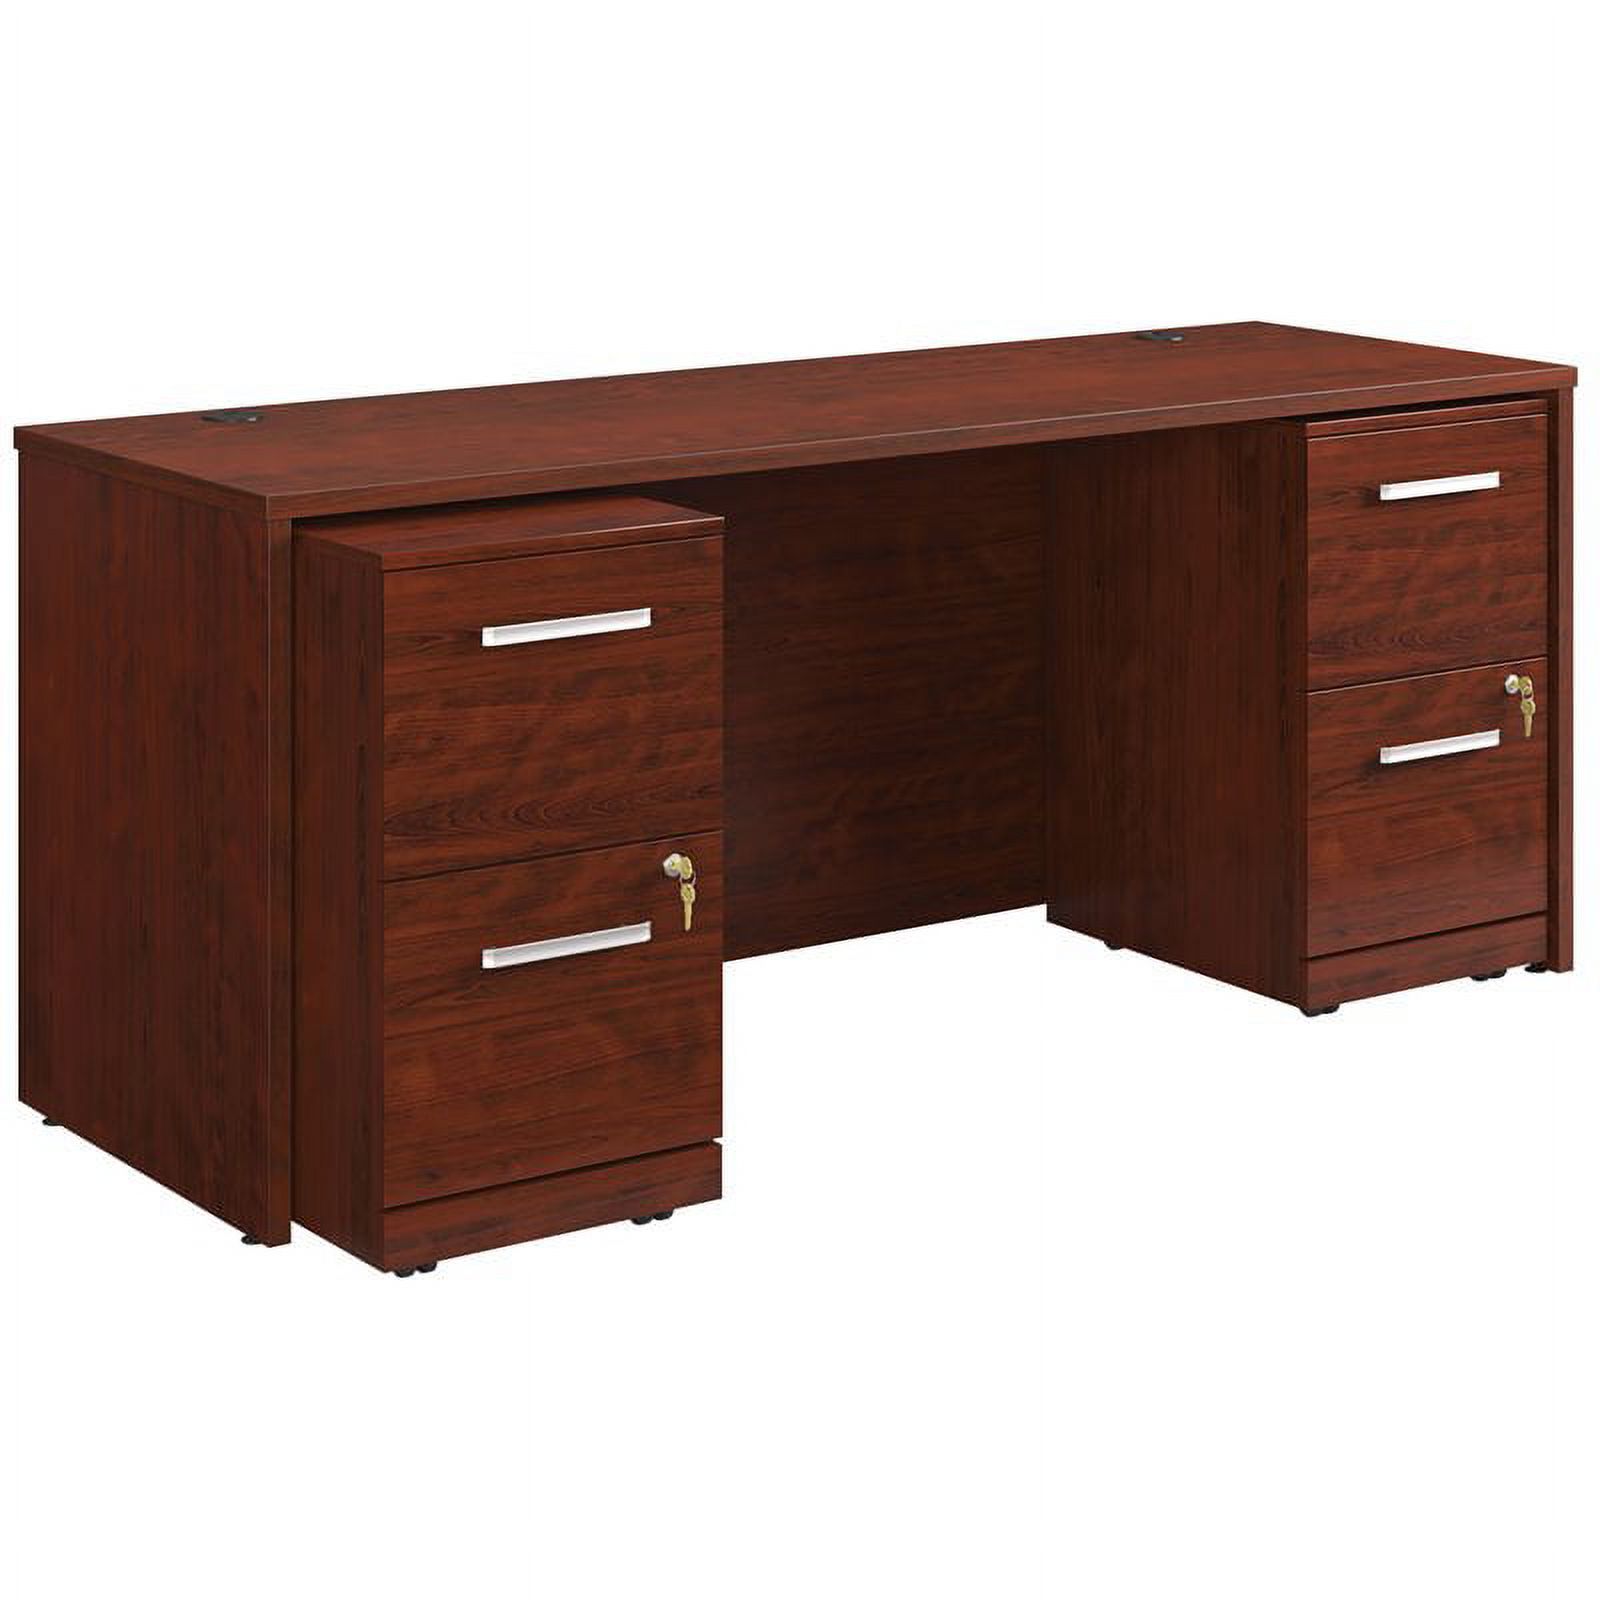 UrbanPro 72" x 24" Shell and Two 2-Drawers Mobile File Cabinet in Cherry - image 2 of 3